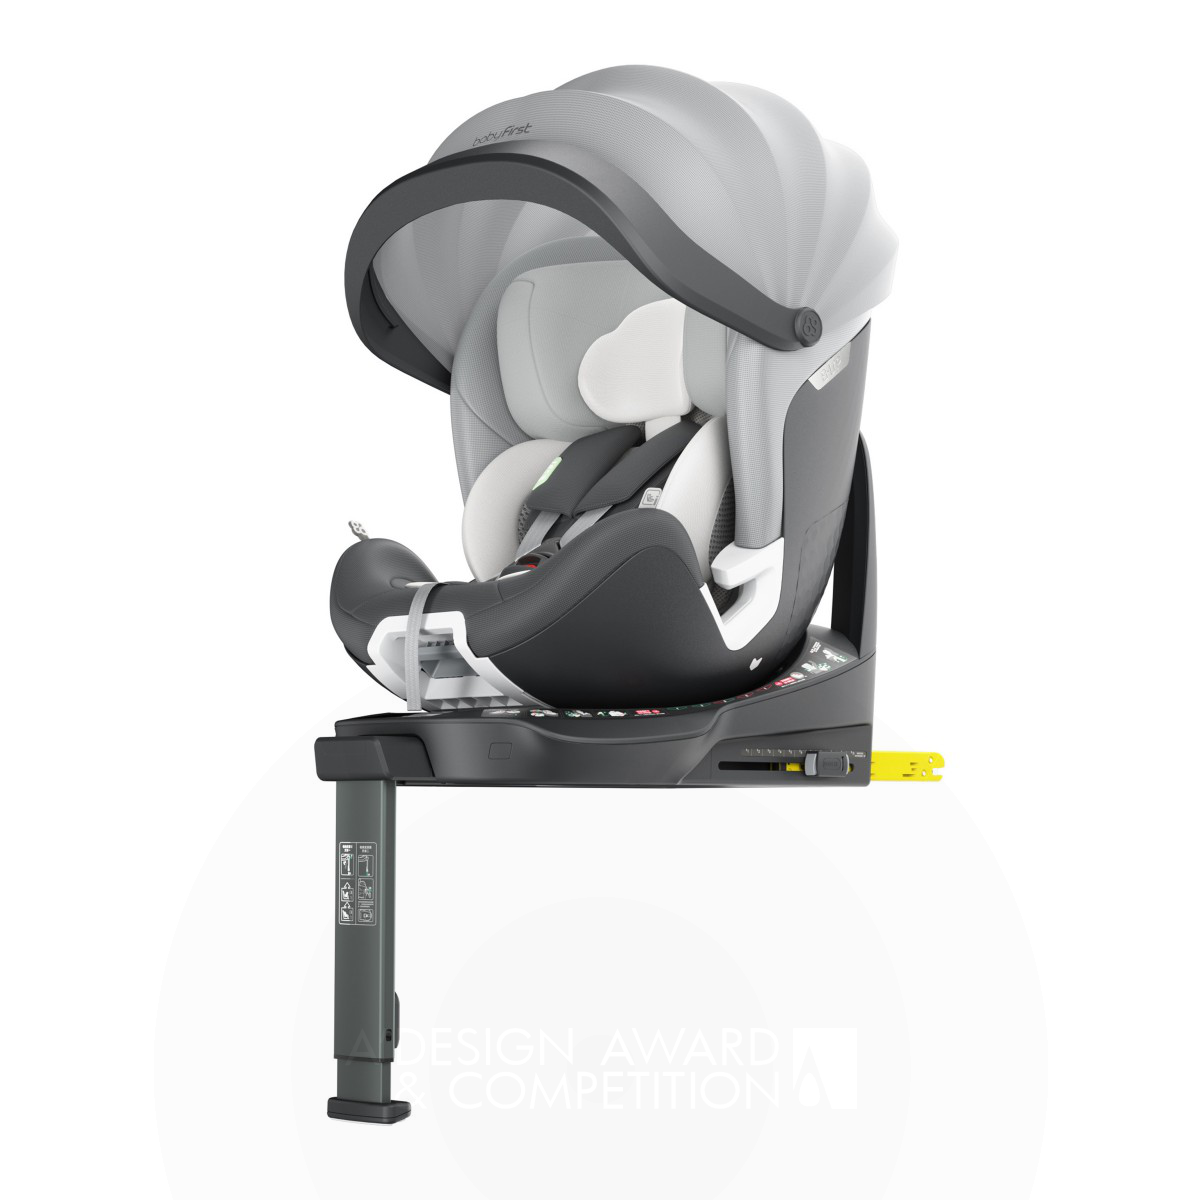 Ningbo Baby First Baby Products Co., Ltd wins Golden at the prestigious A' Baby, Kids and Children's Products Design Award with Babyfirst Joy Pro R155 Child Car Seats.